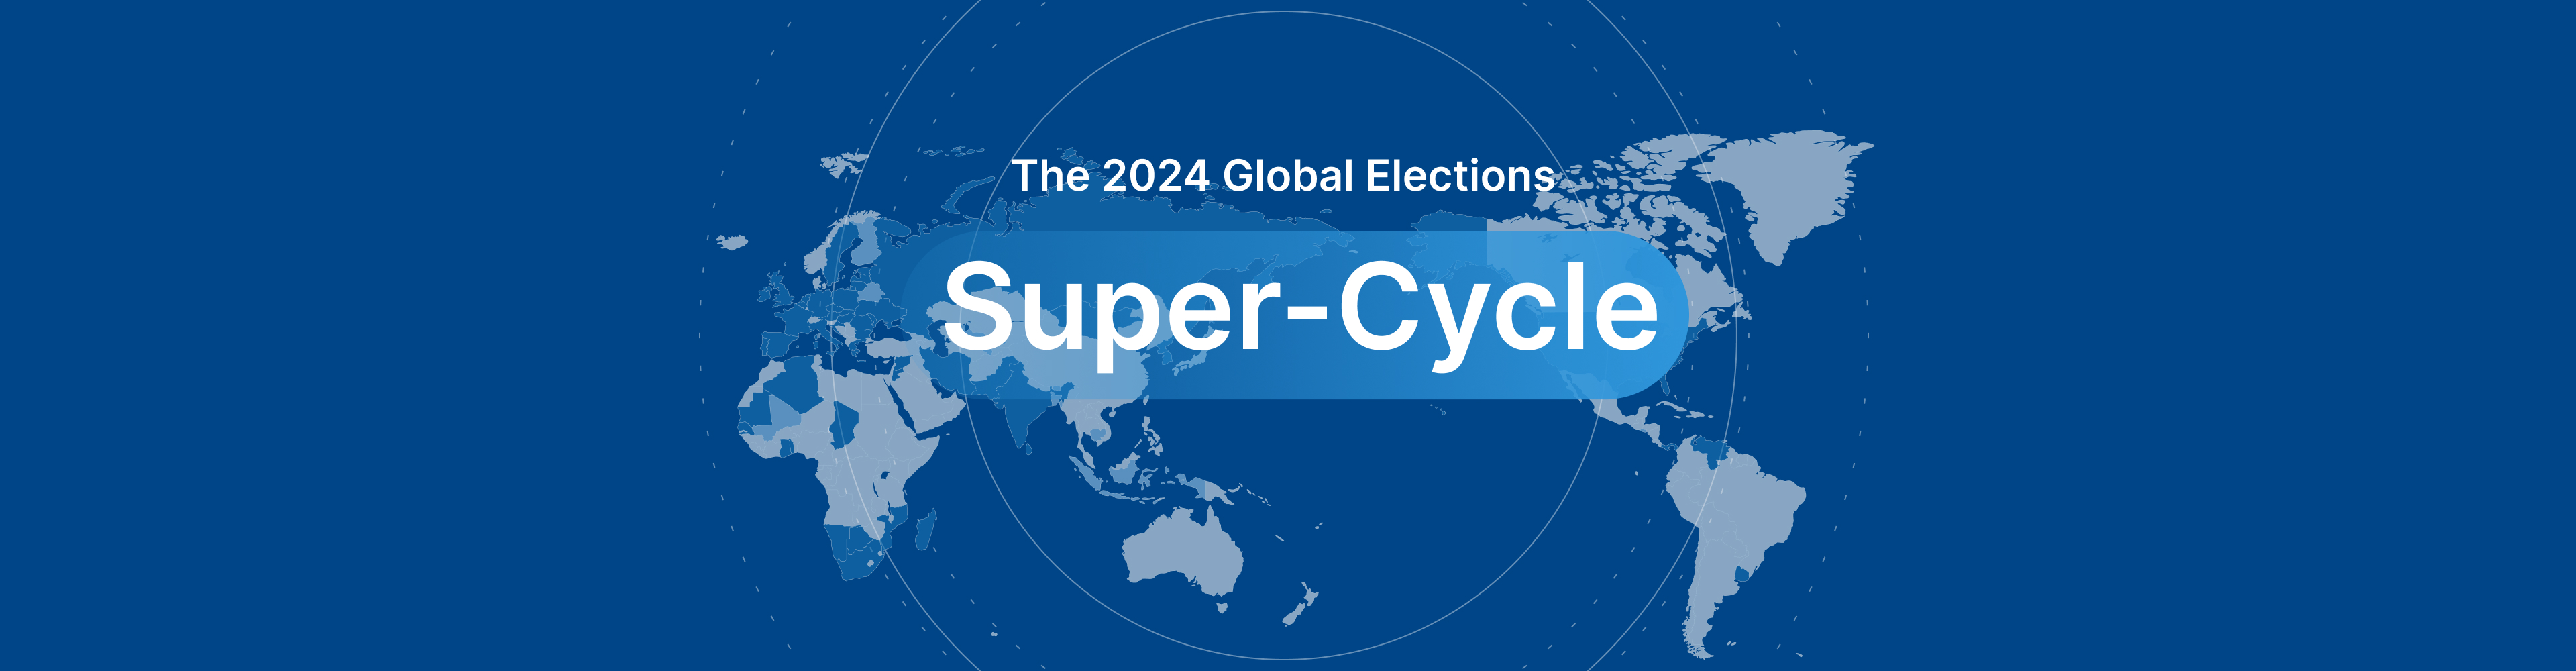 2024 Global Elections Super-Cycle